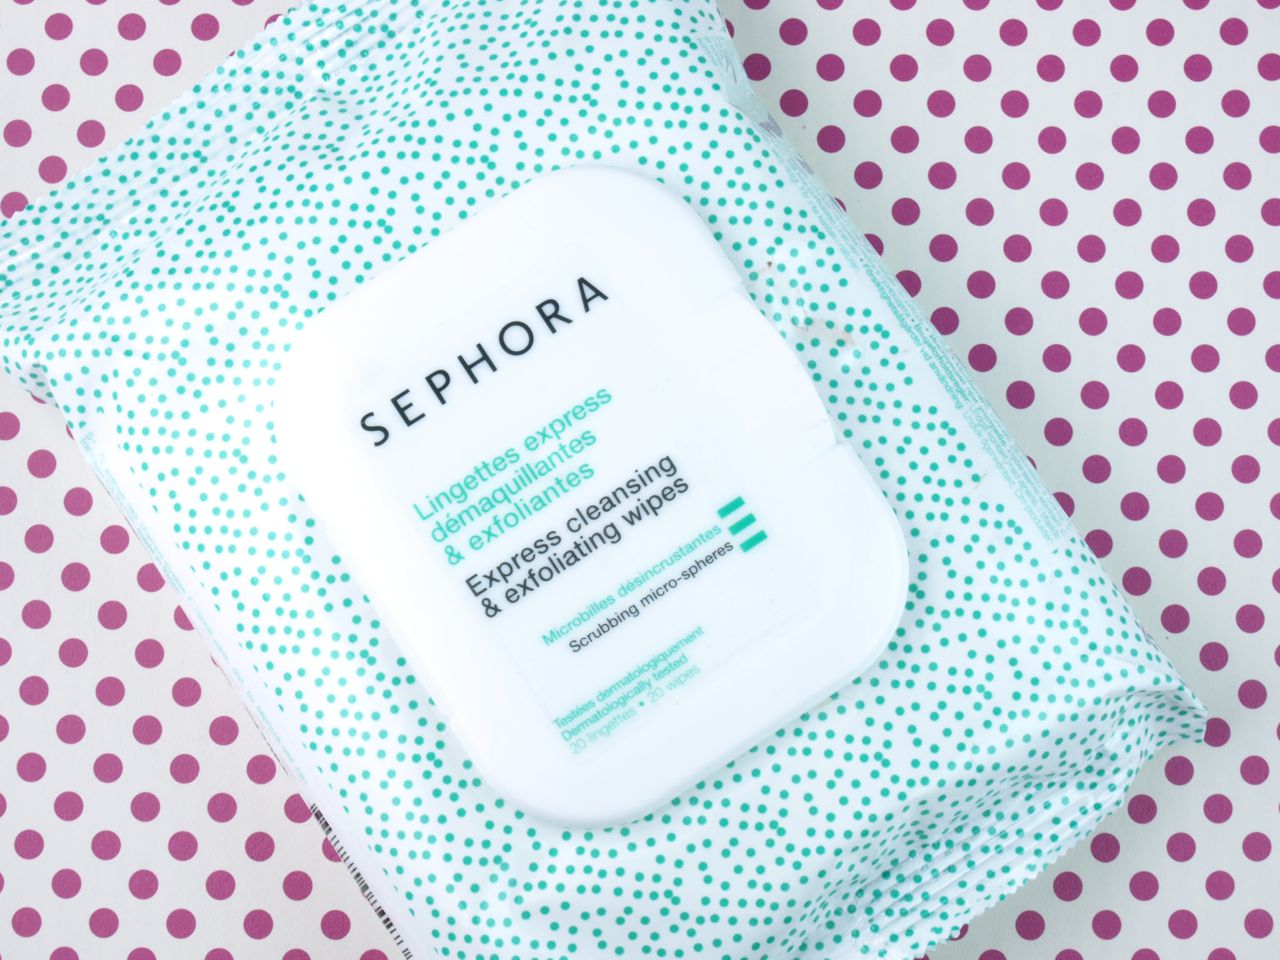 Sephora Express Cleansing & Exfoliating Wipes: Review